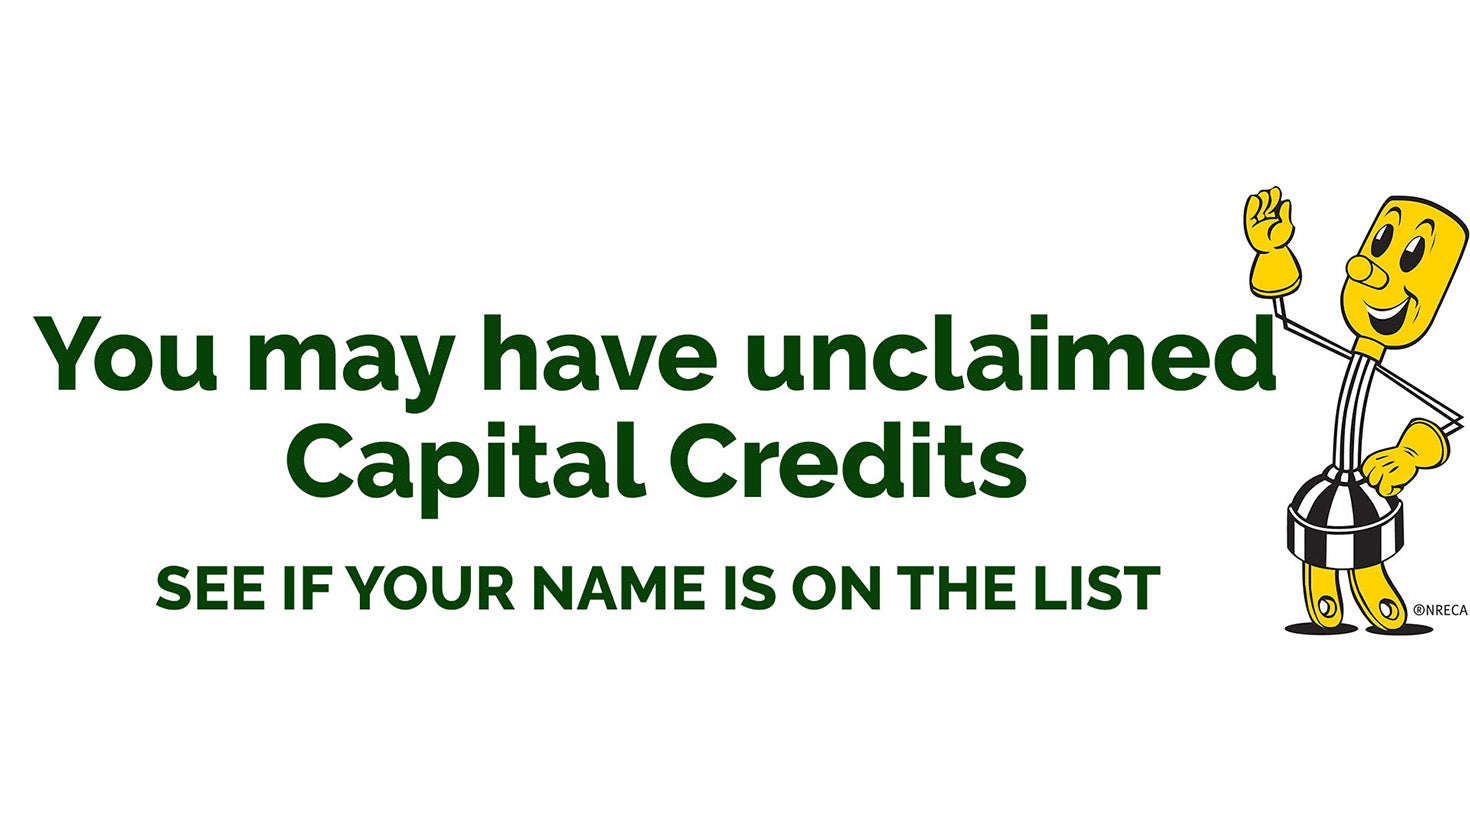 You may have unclaimed Capital Credits